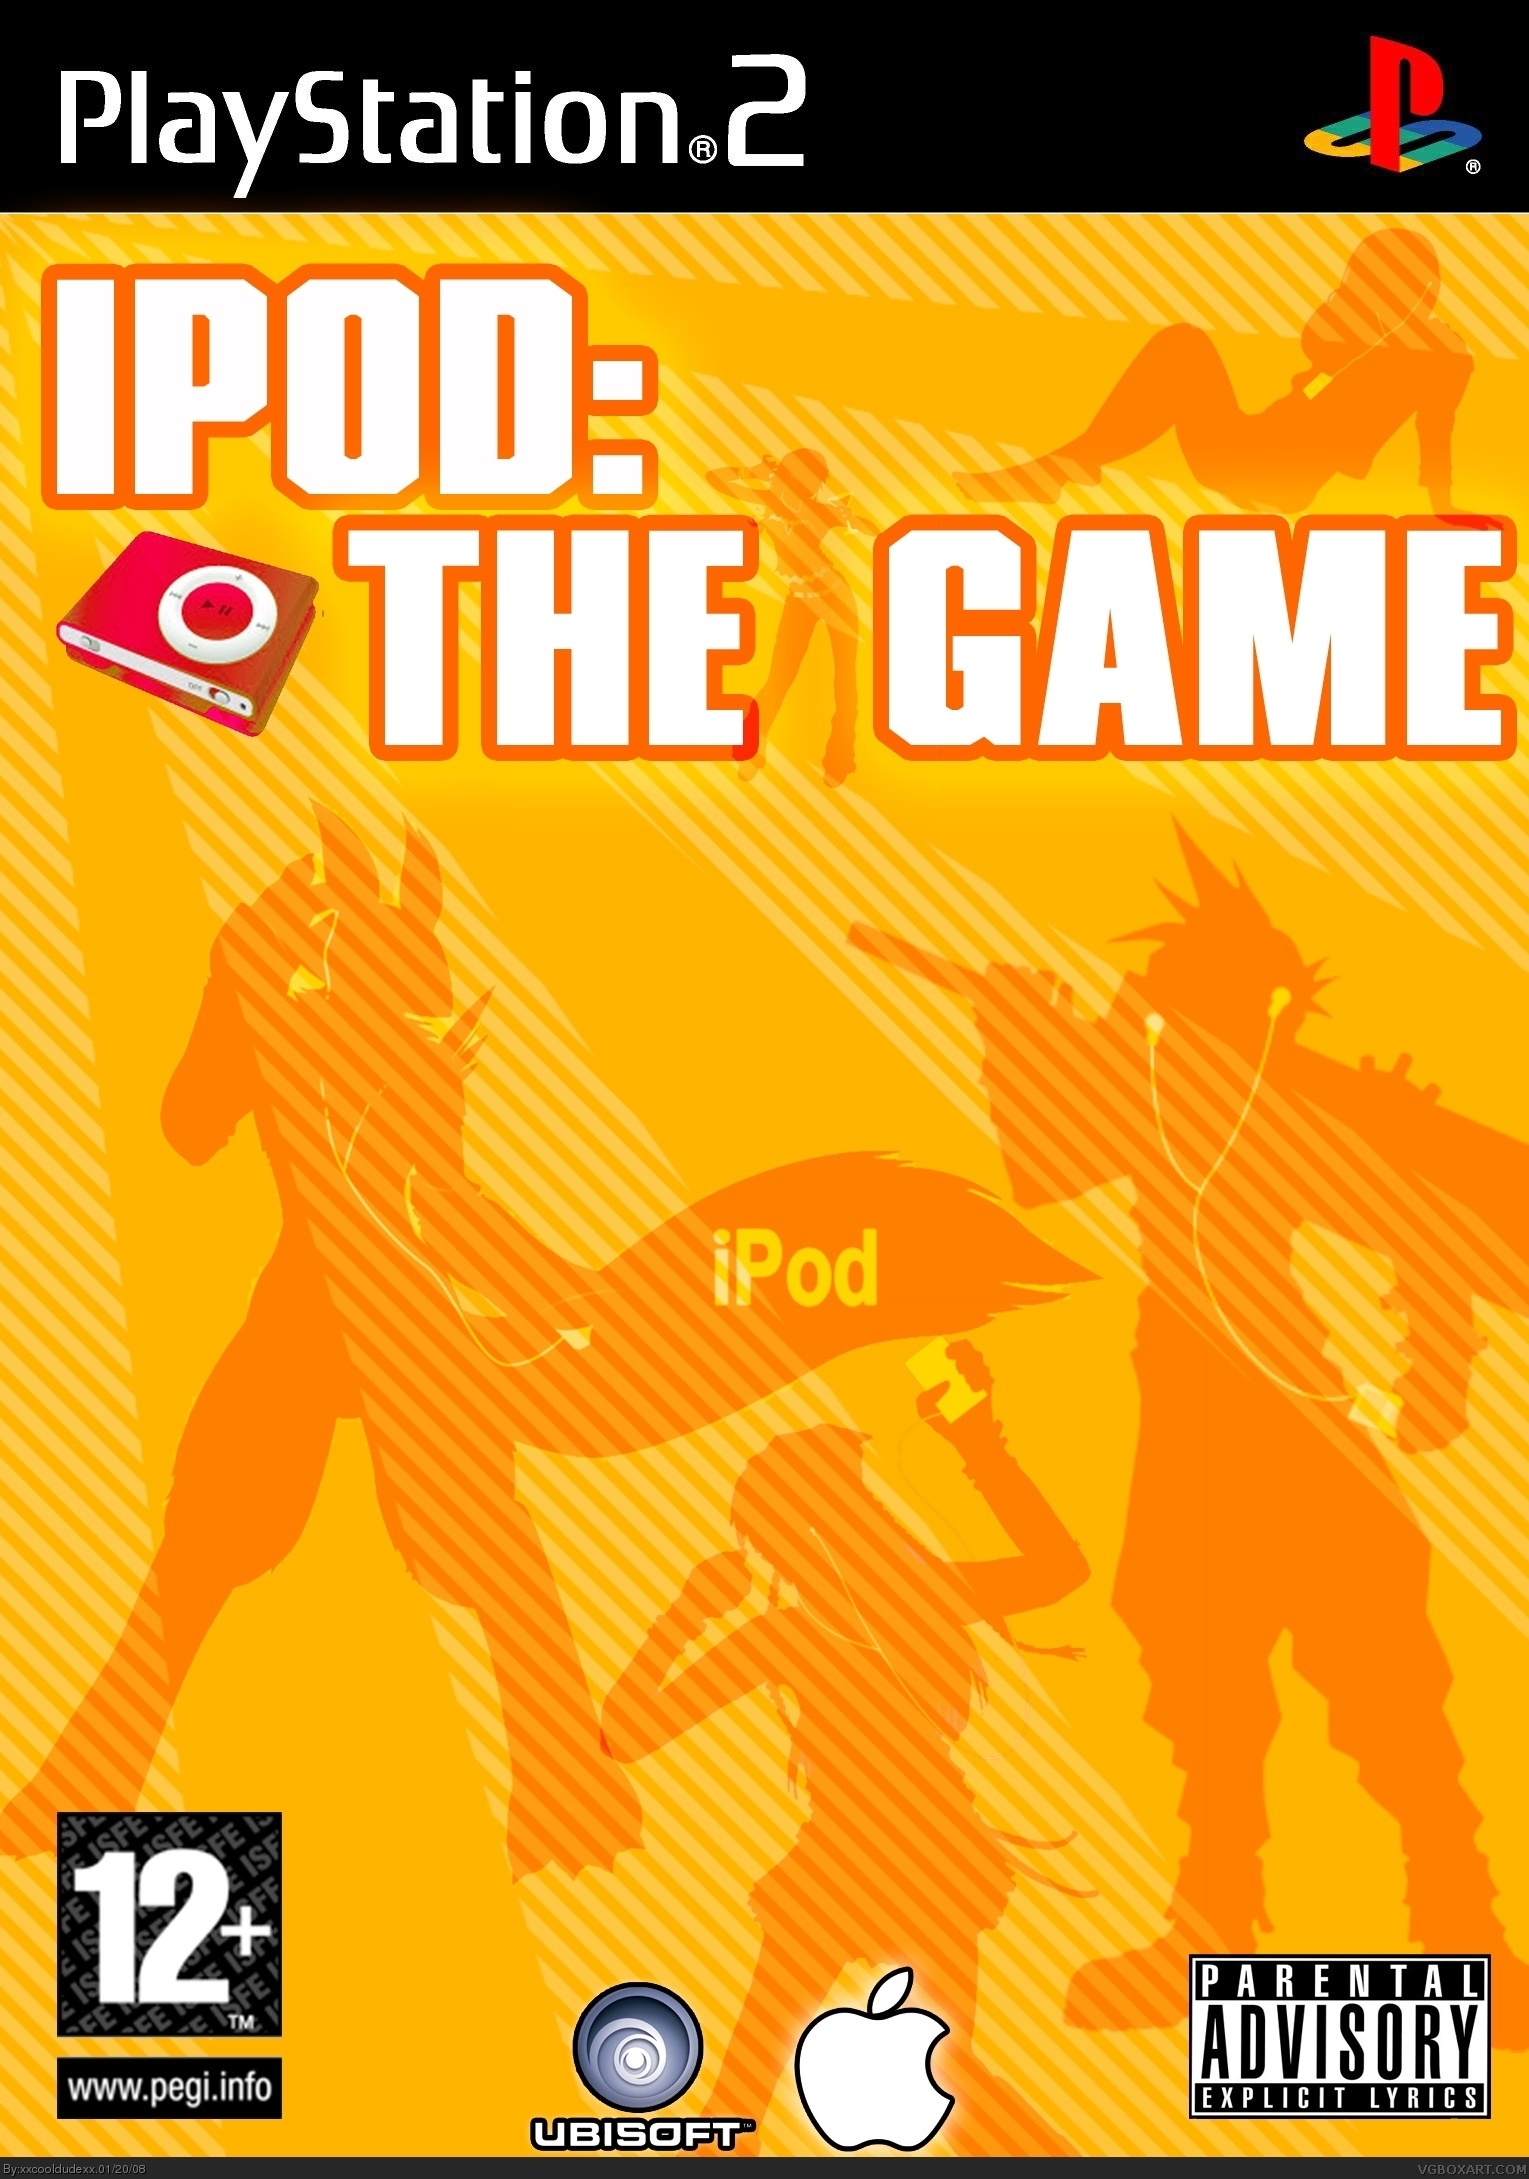 Ipod: The game box cover